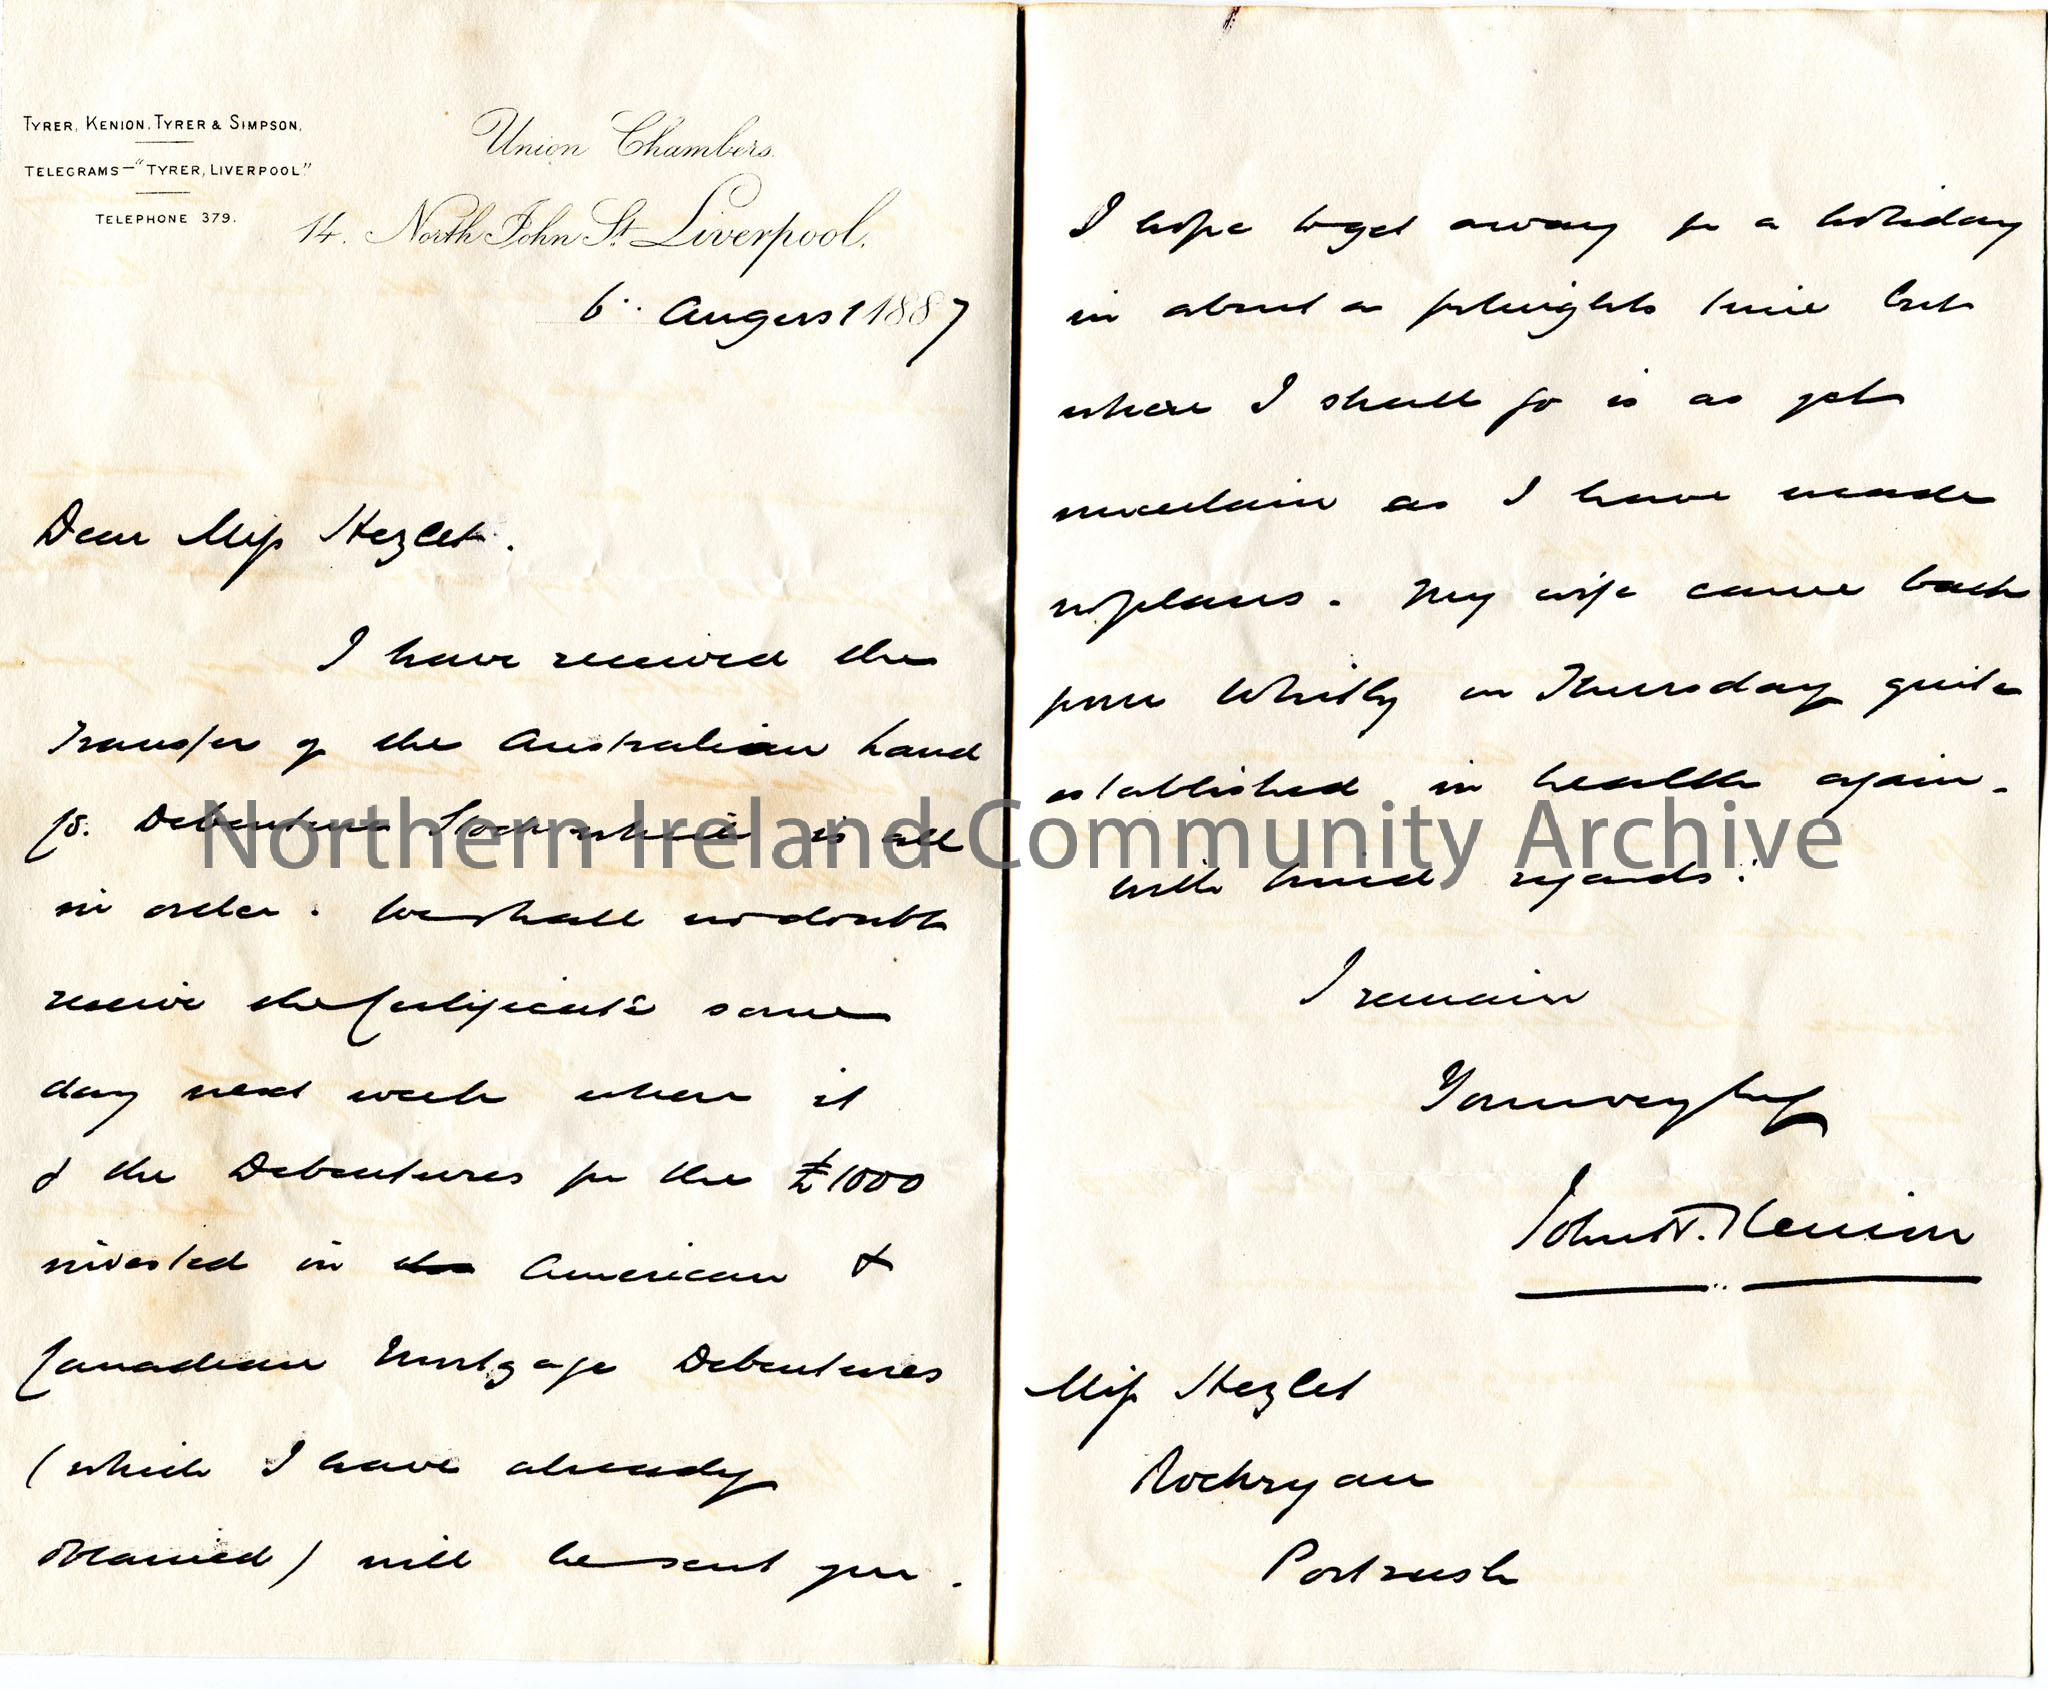 Handwritten letter to Miss Hezlet at Rockryan, Portrush, Ireland. Informs Miss Hezlet he has received the transfer of the Australian Land and Debentur…